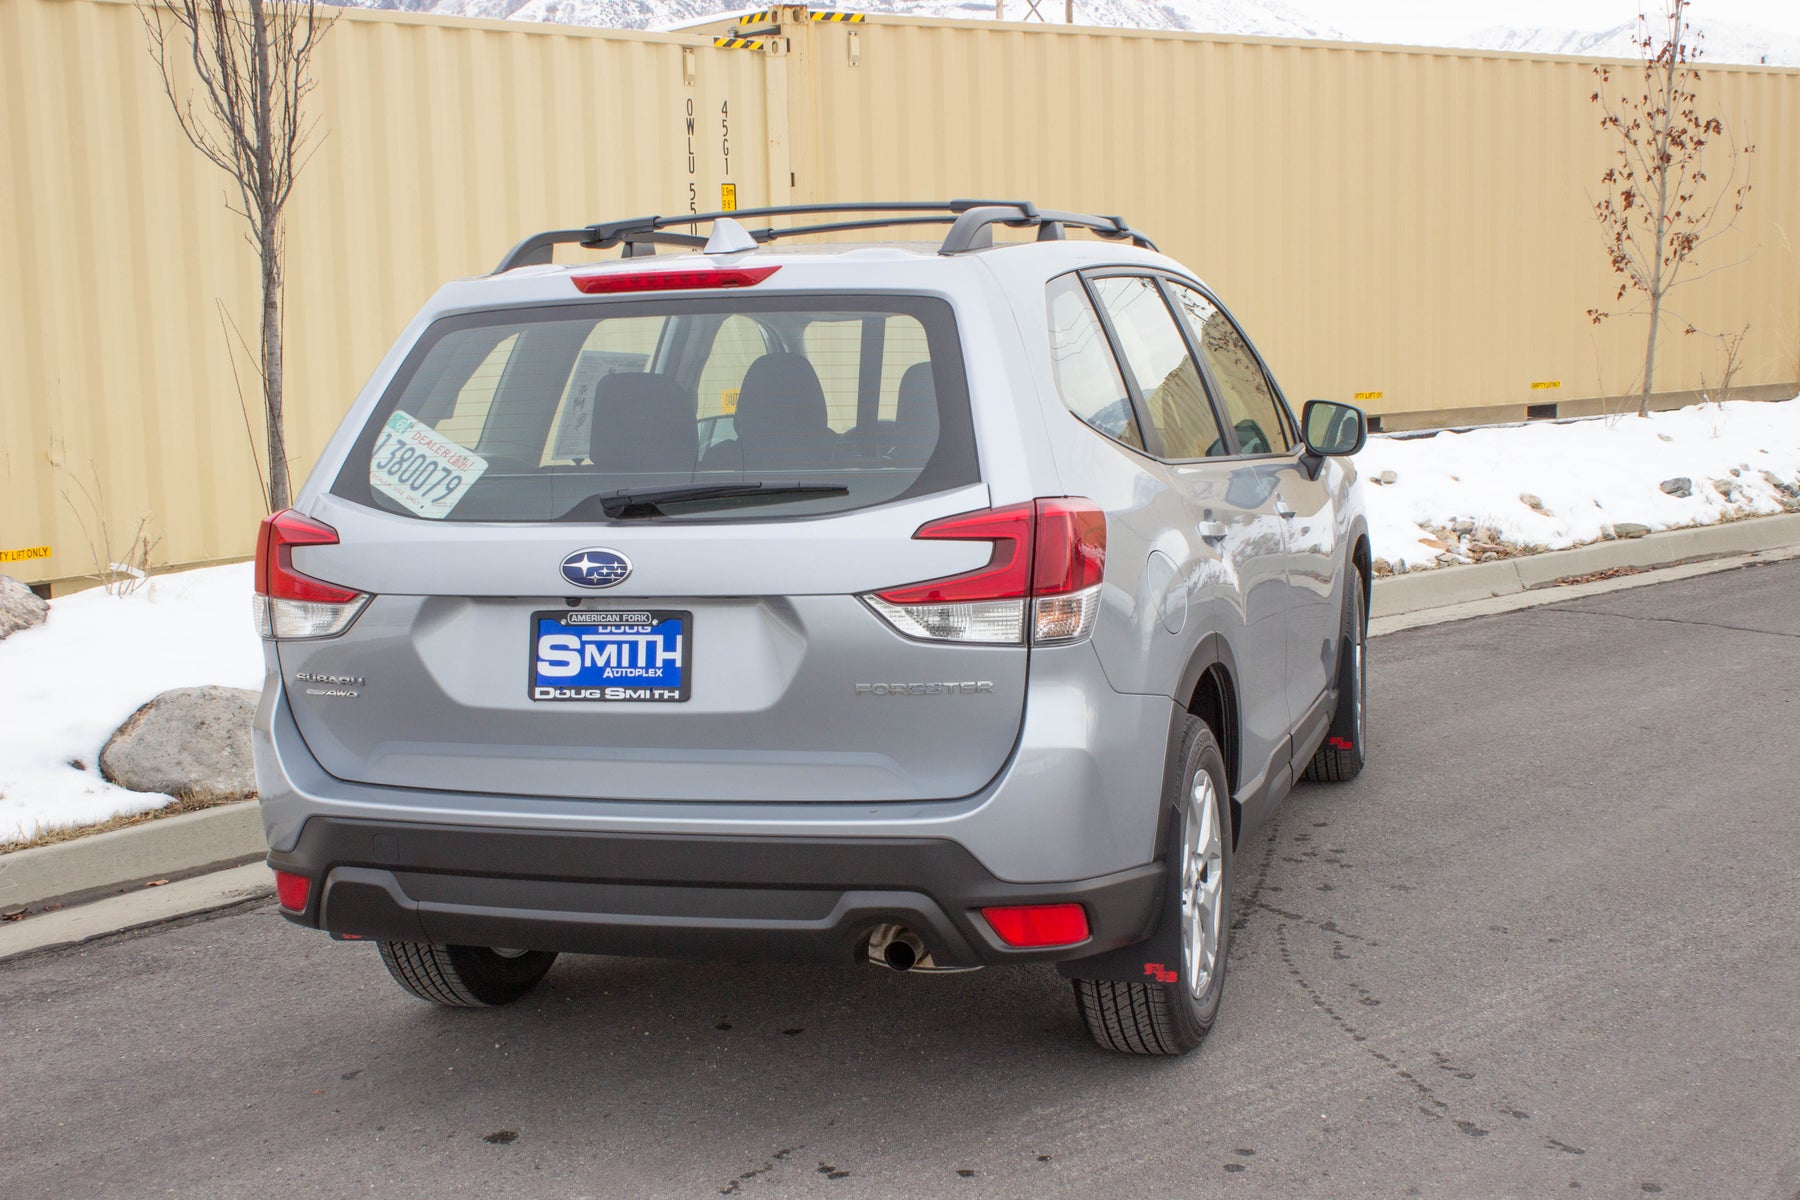 What we love about the NEWLY Released 2019 Subaru Forester!